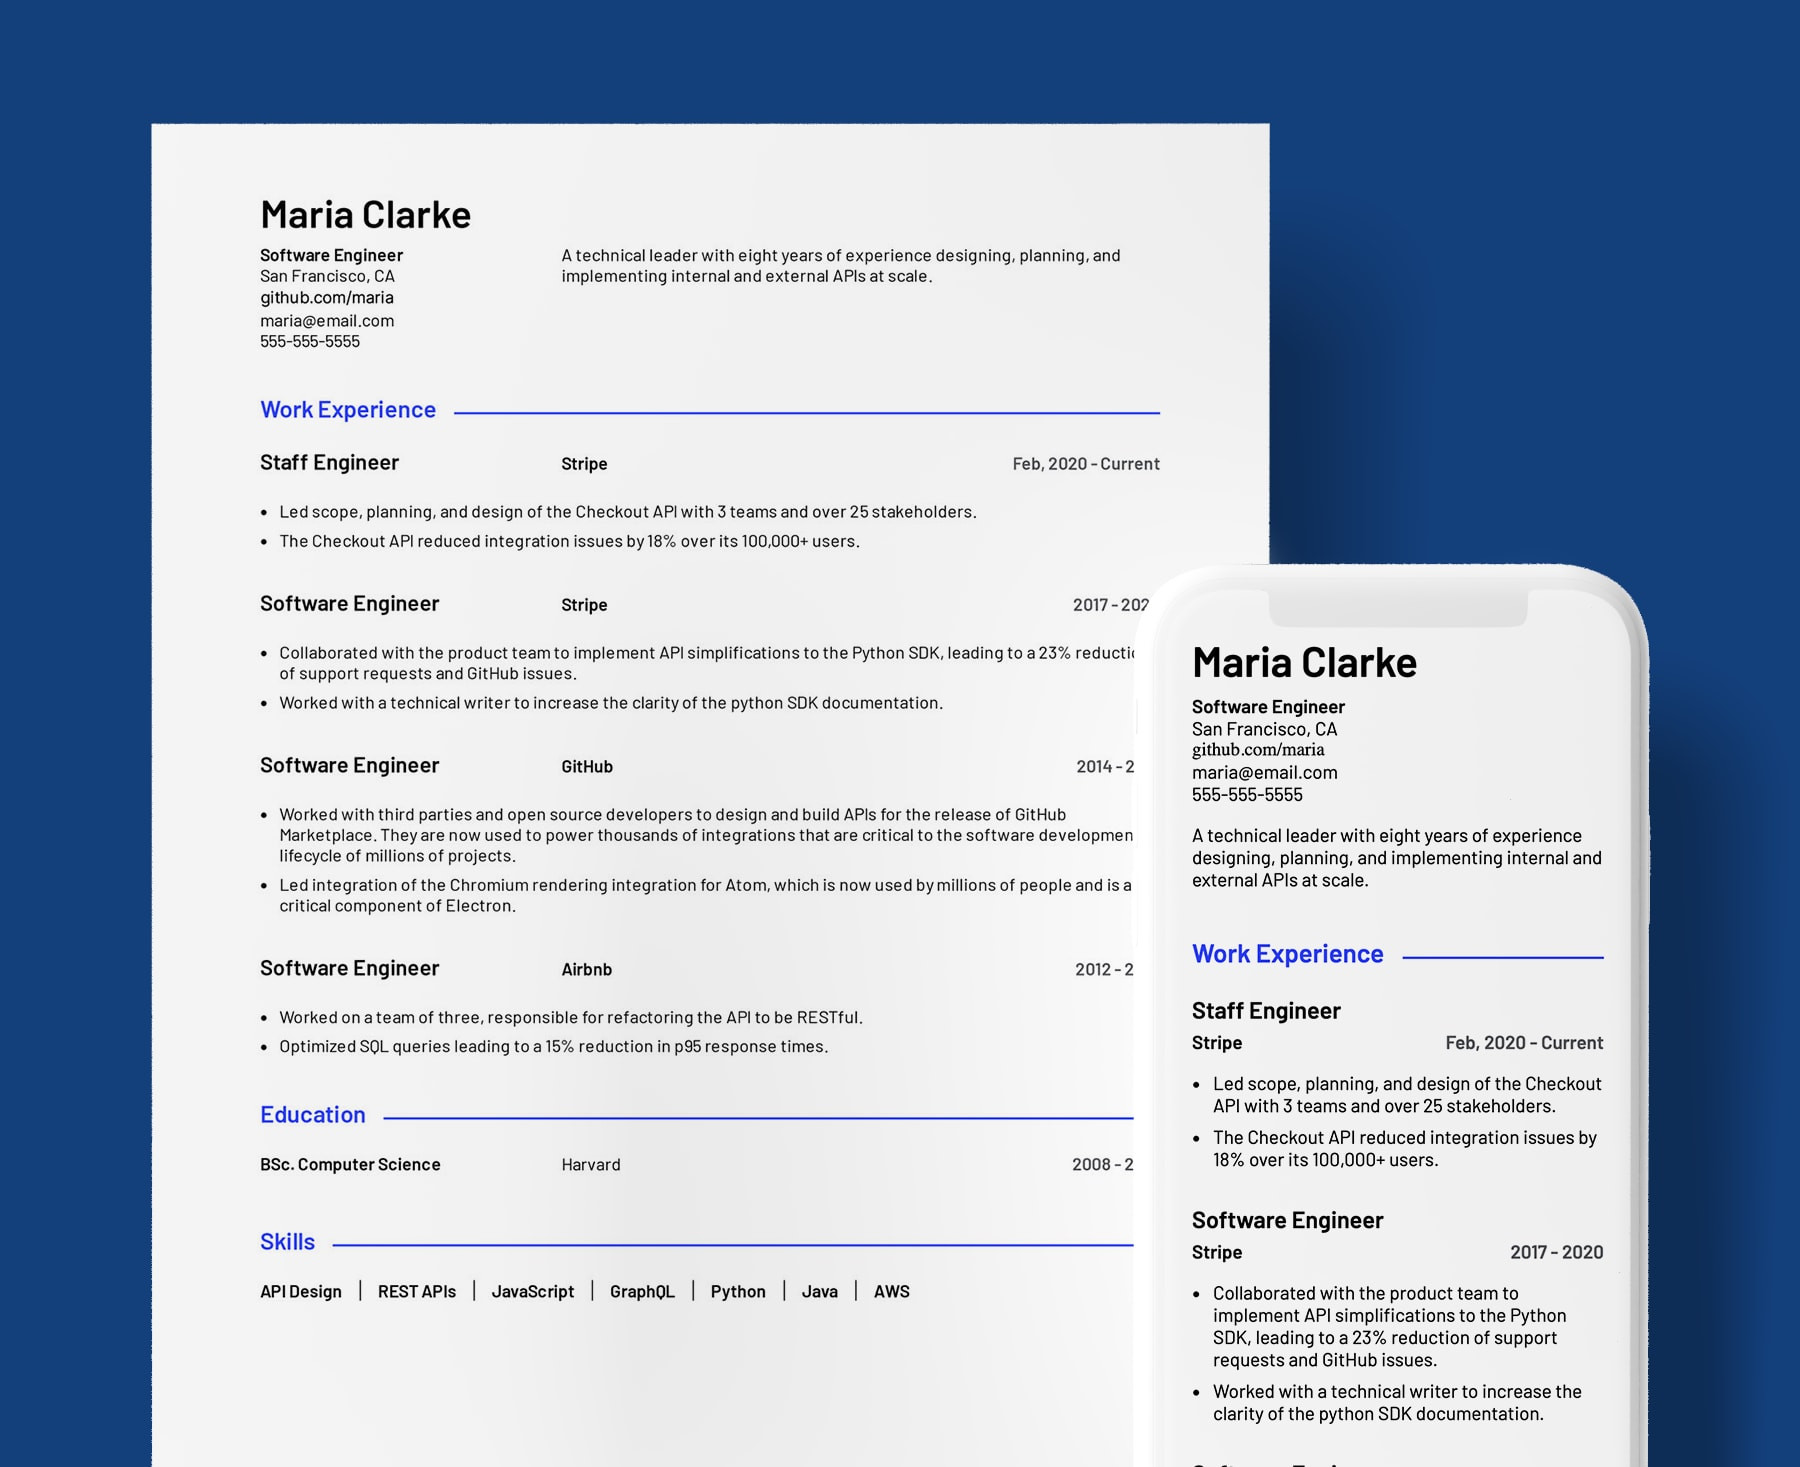 Resume Samples for Experienced Professionals Template Professional Resume Templates to Impress Recruiters